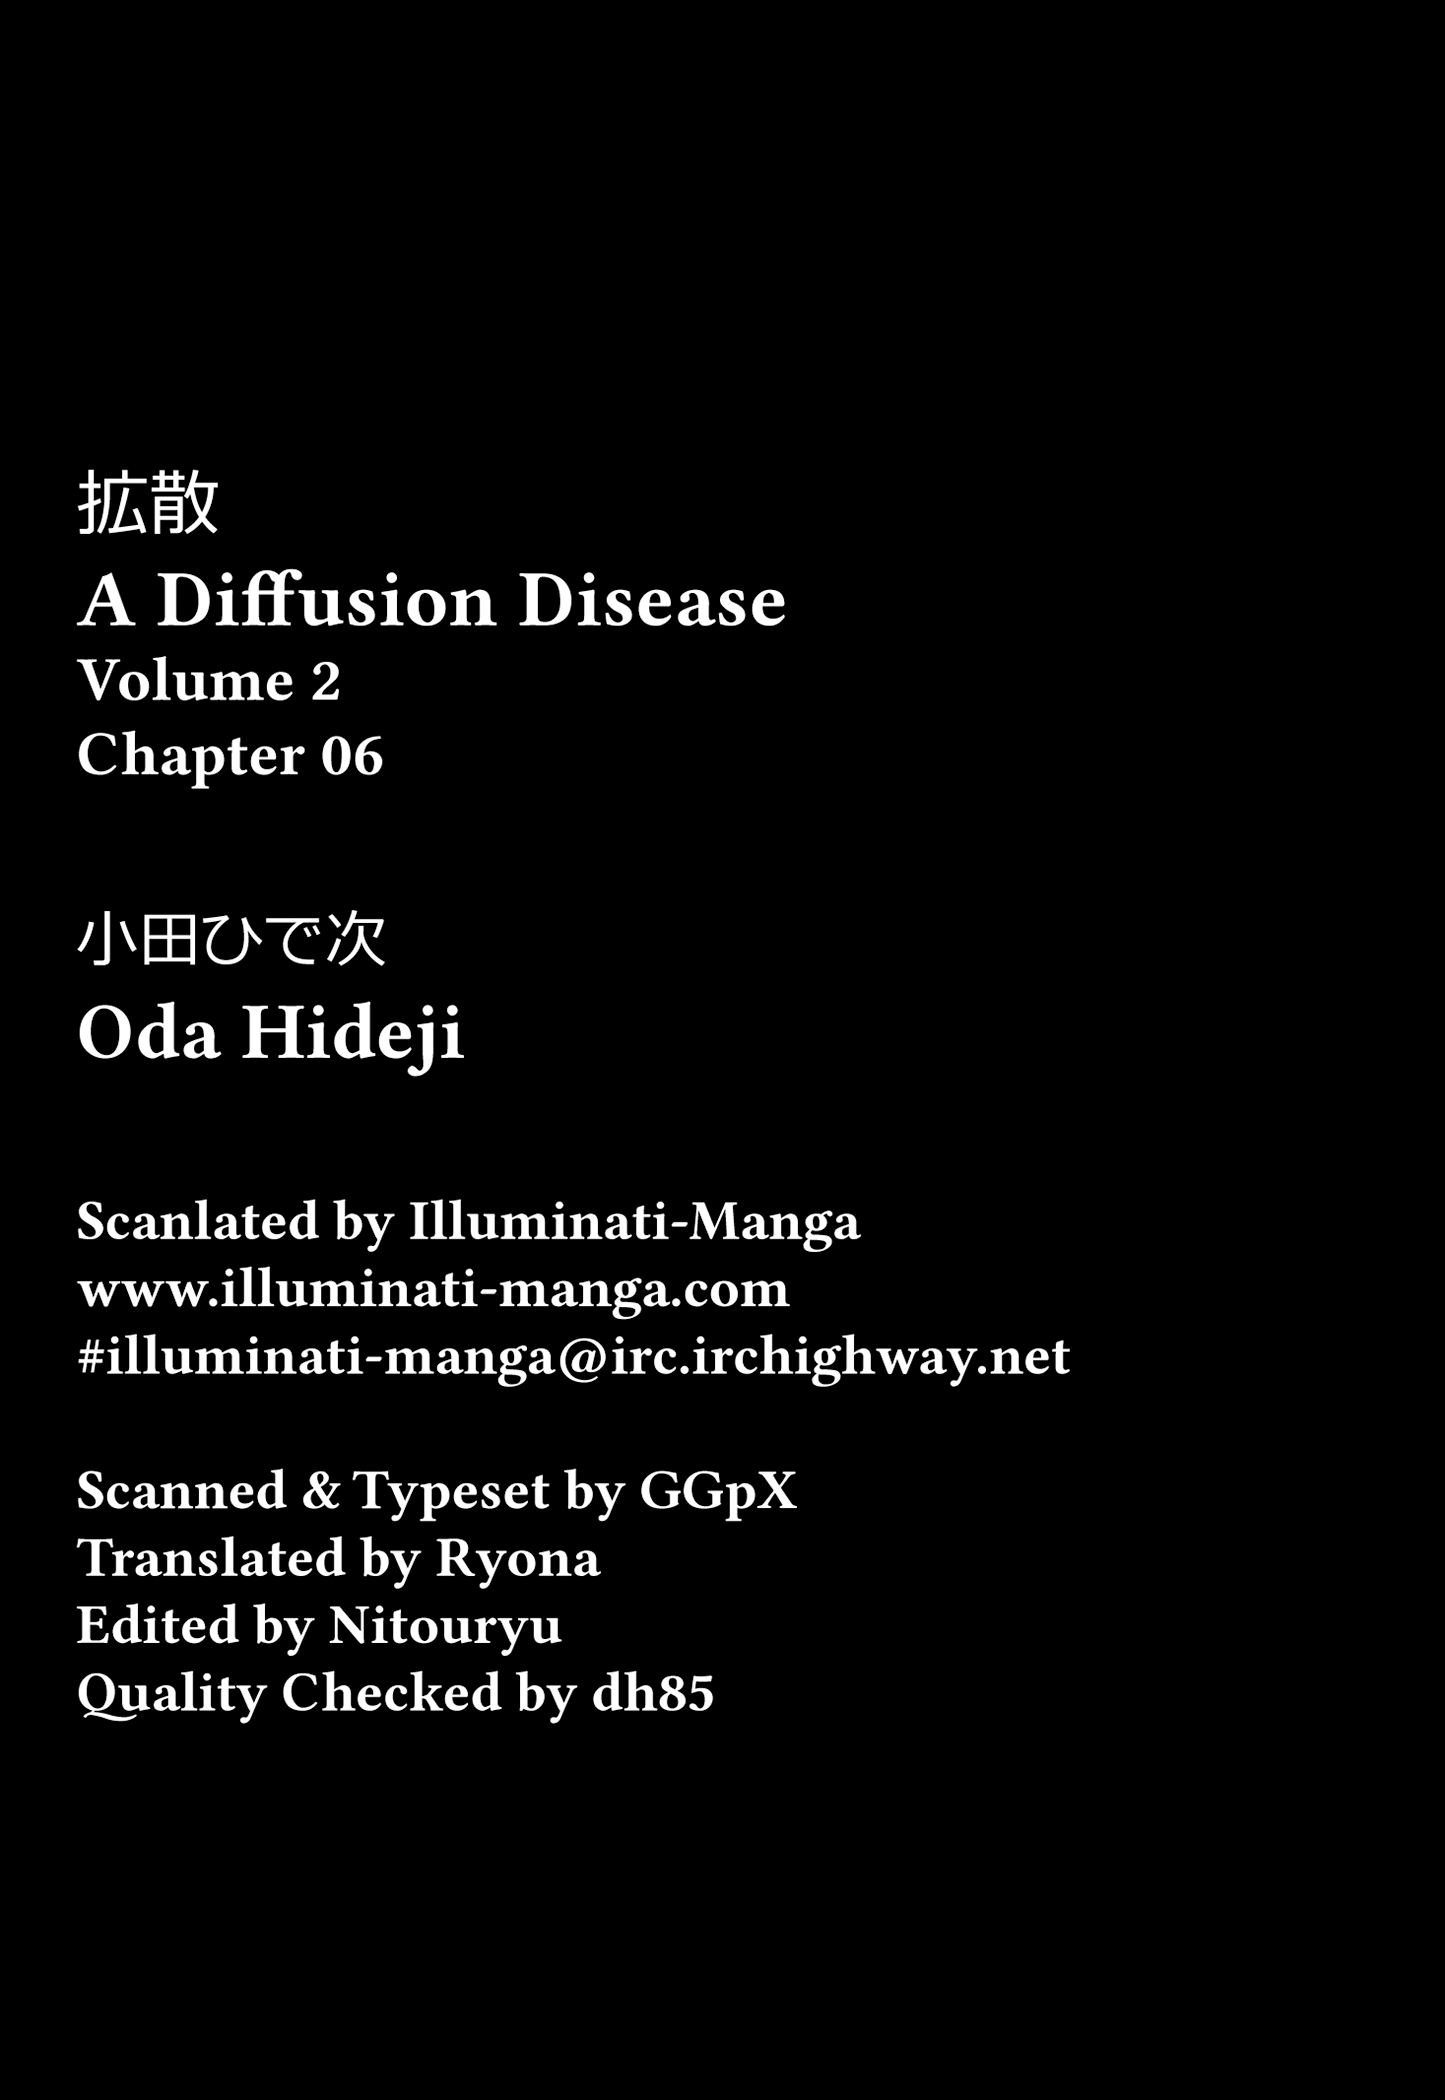 A Diffusion Disease Chapter 6 #1